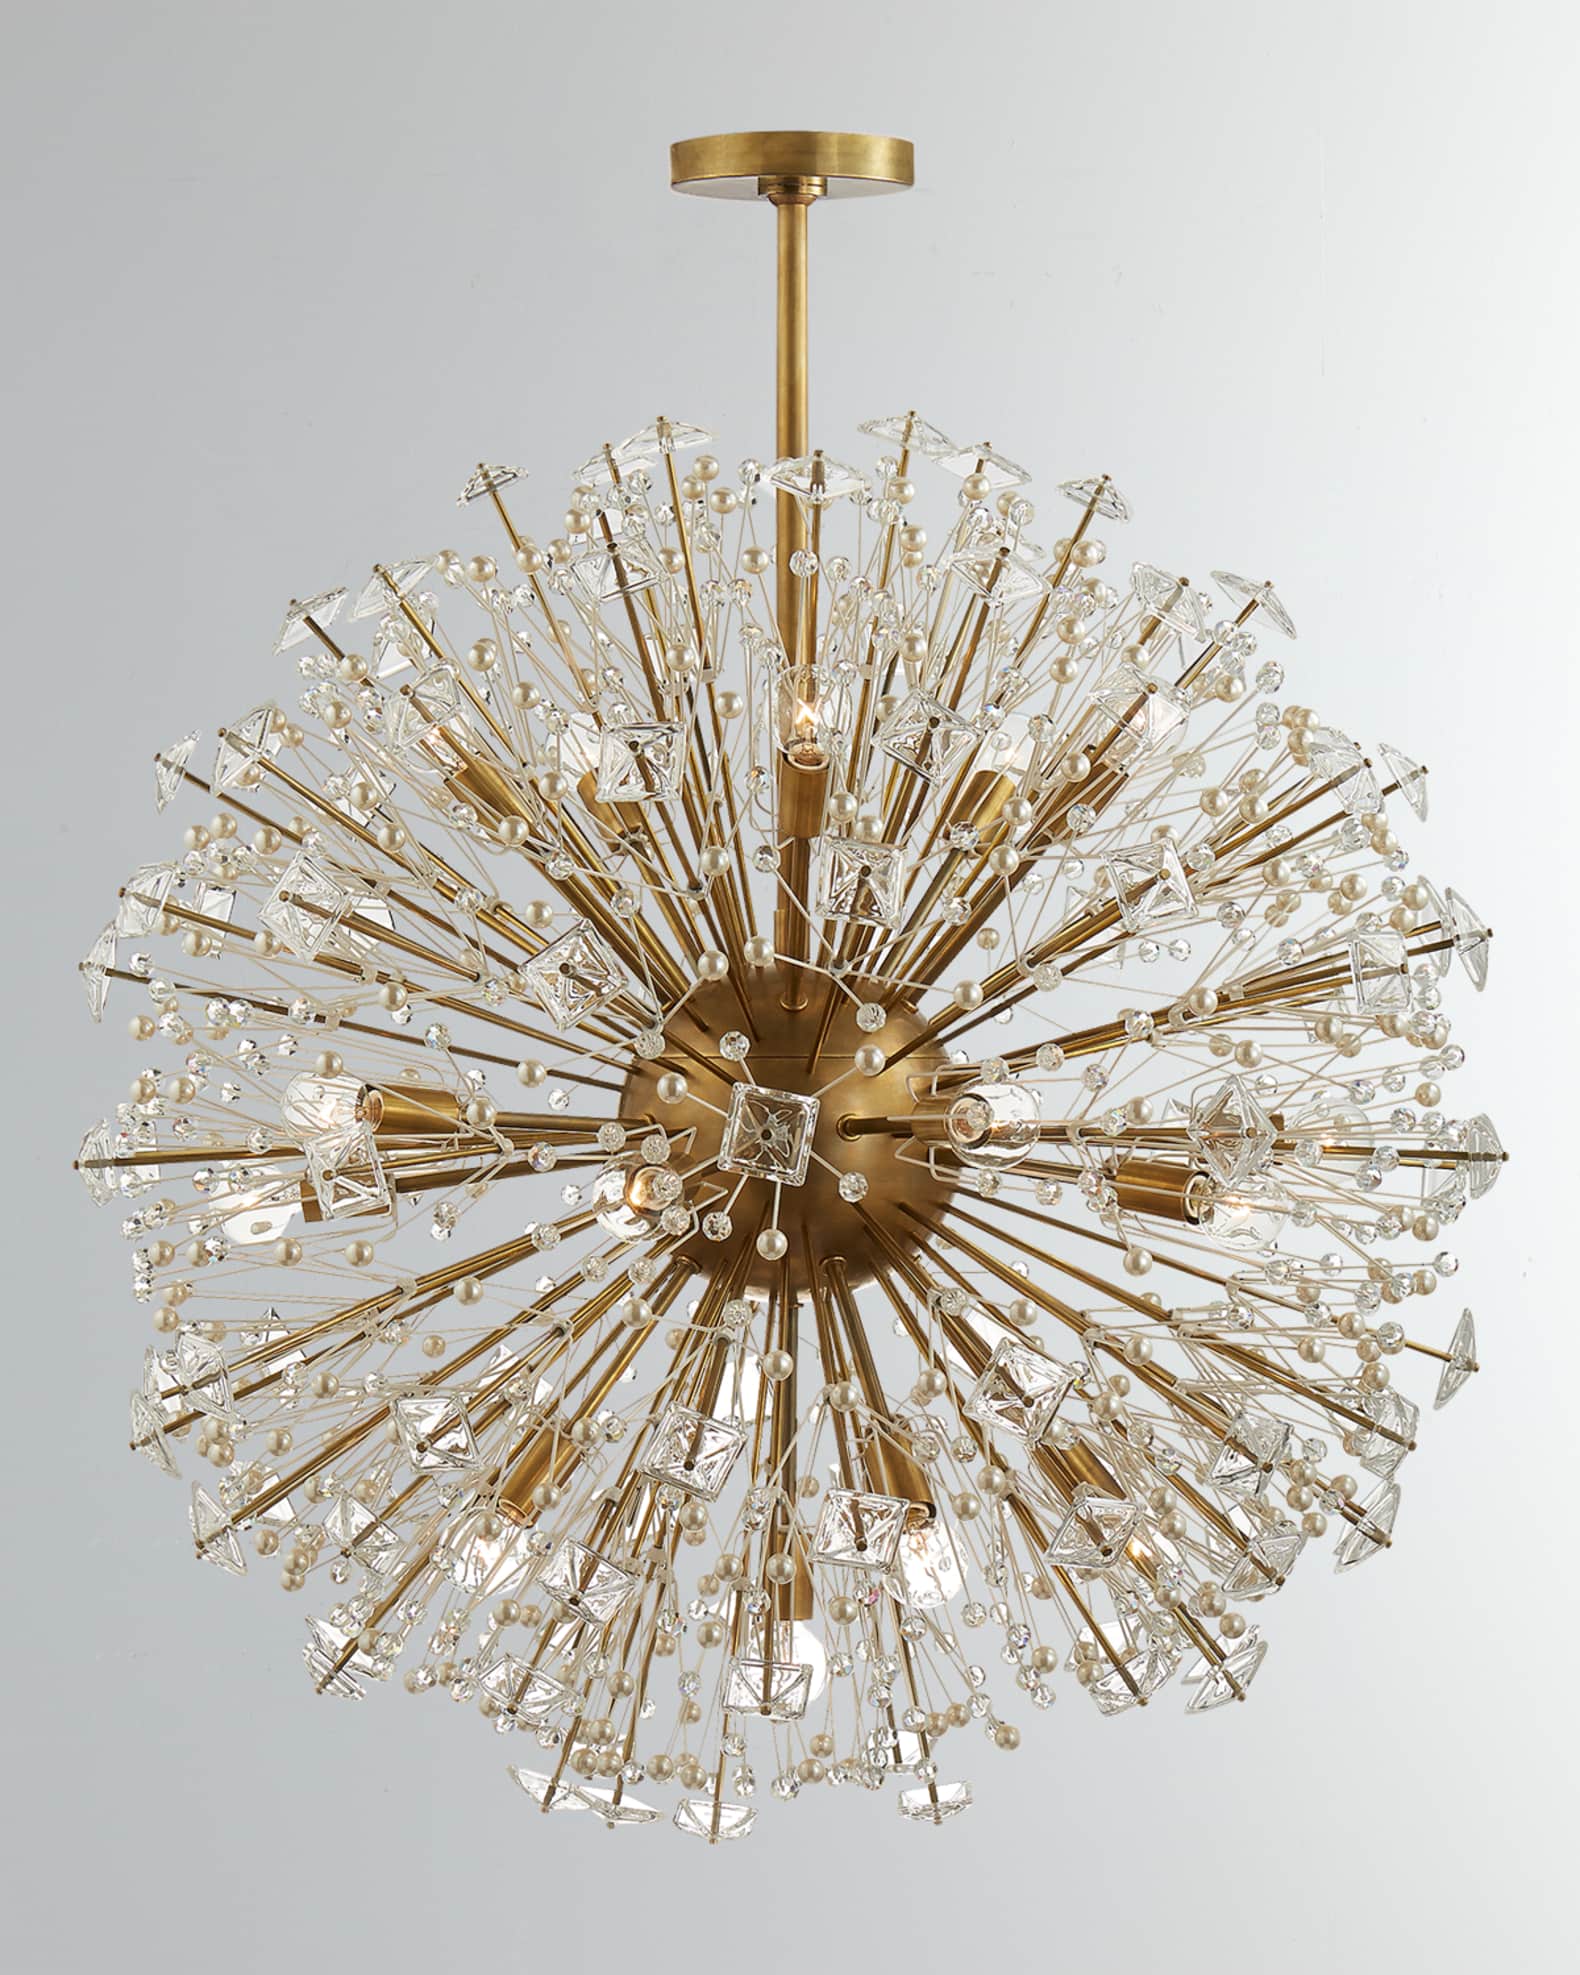 Kate Spade New York for Visual Comfort Signature Dickinson Large Chandelier  | Neiman Marcus